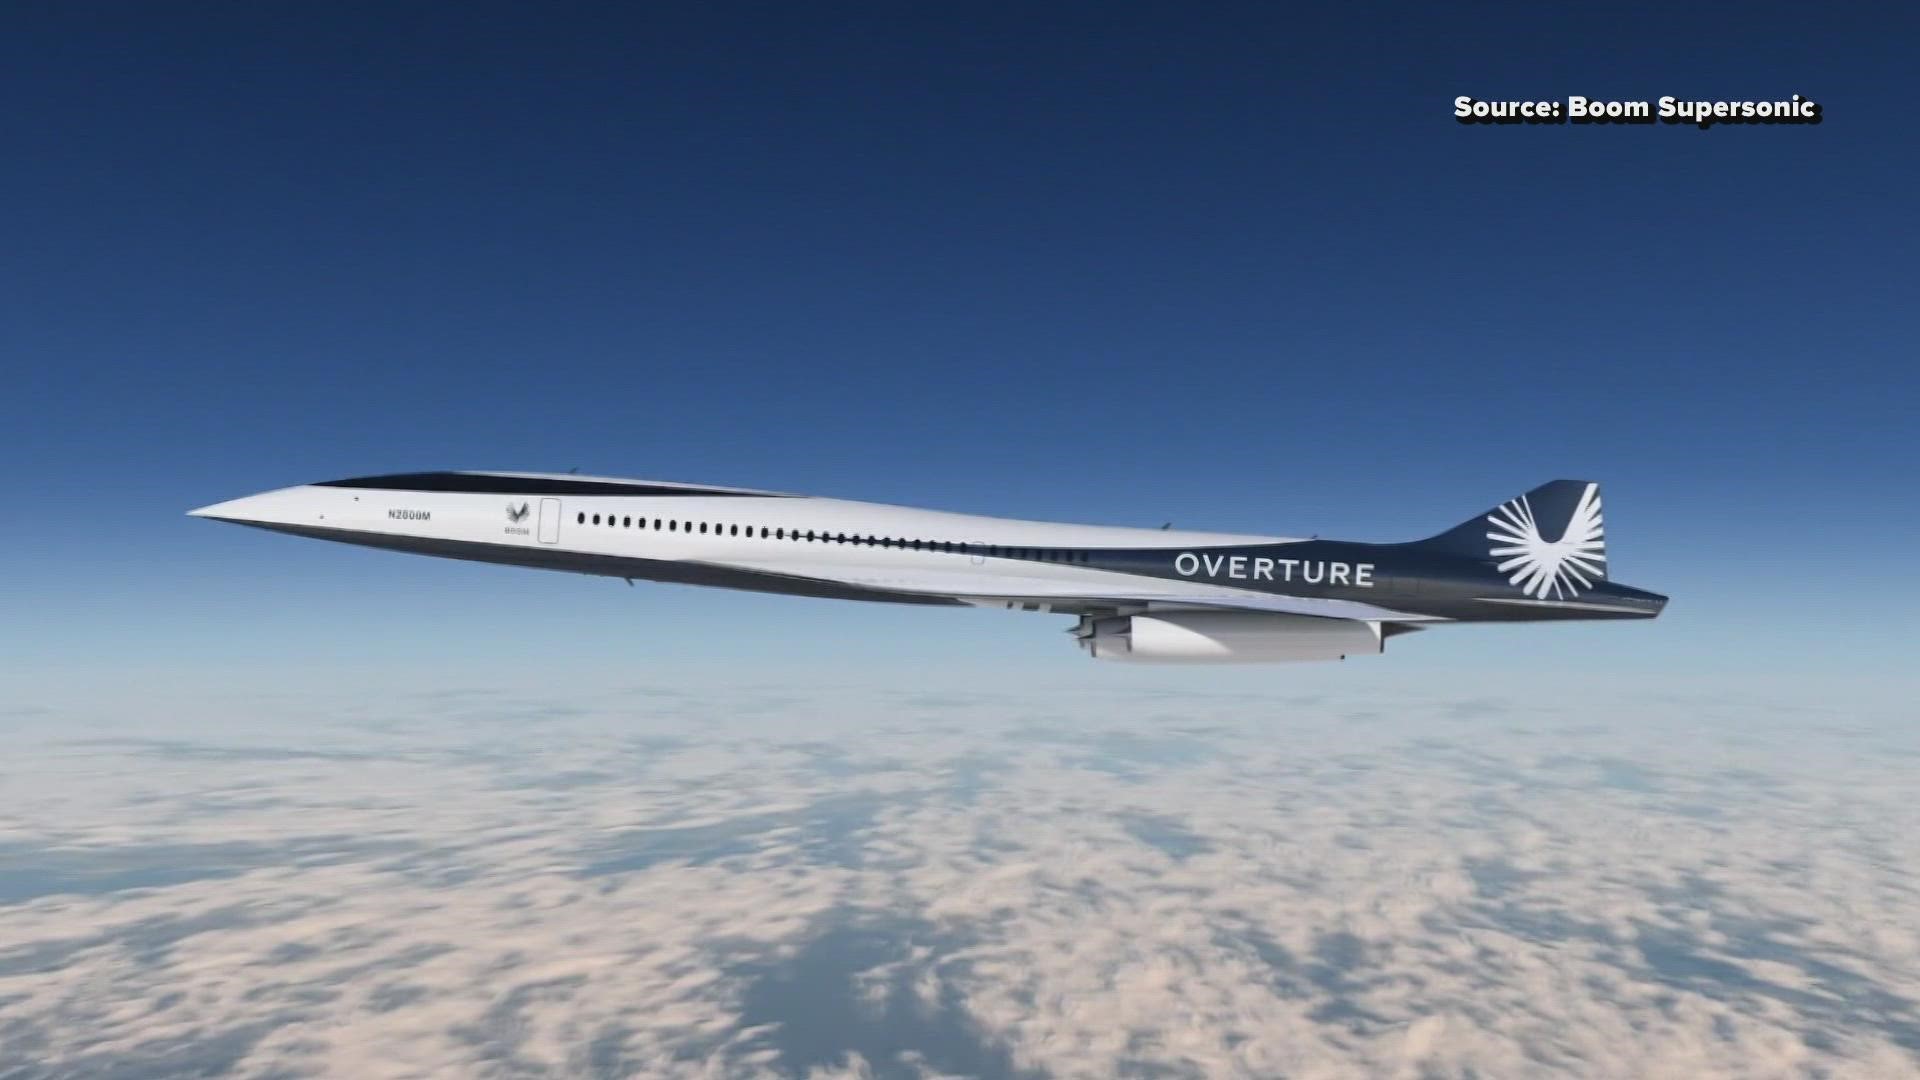 American Airlines joins united in agreement to purchase Boom Supersonic’s aircrafts.